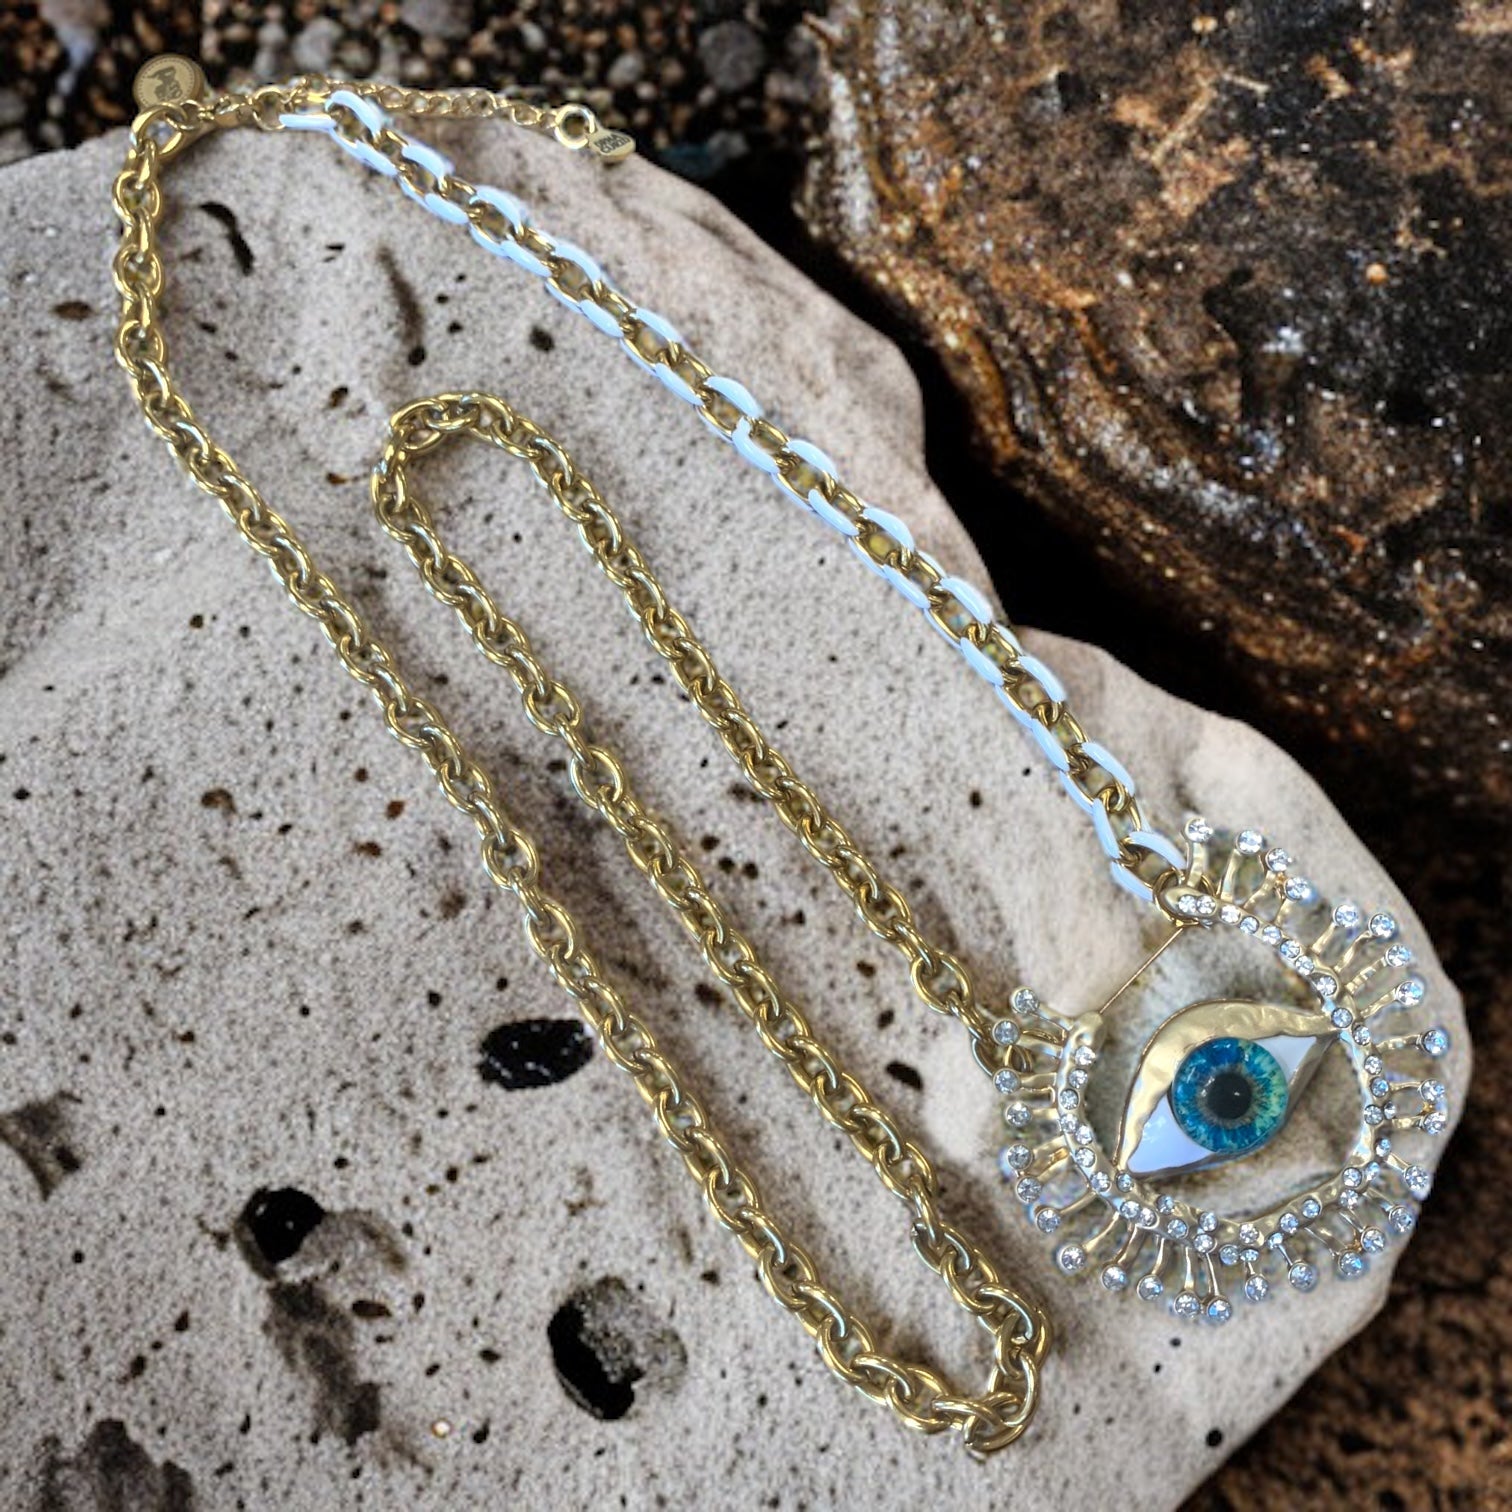 1 of 1 Evil Eye White and Gold Jolene Statement Multiwear Necklace-Necklace